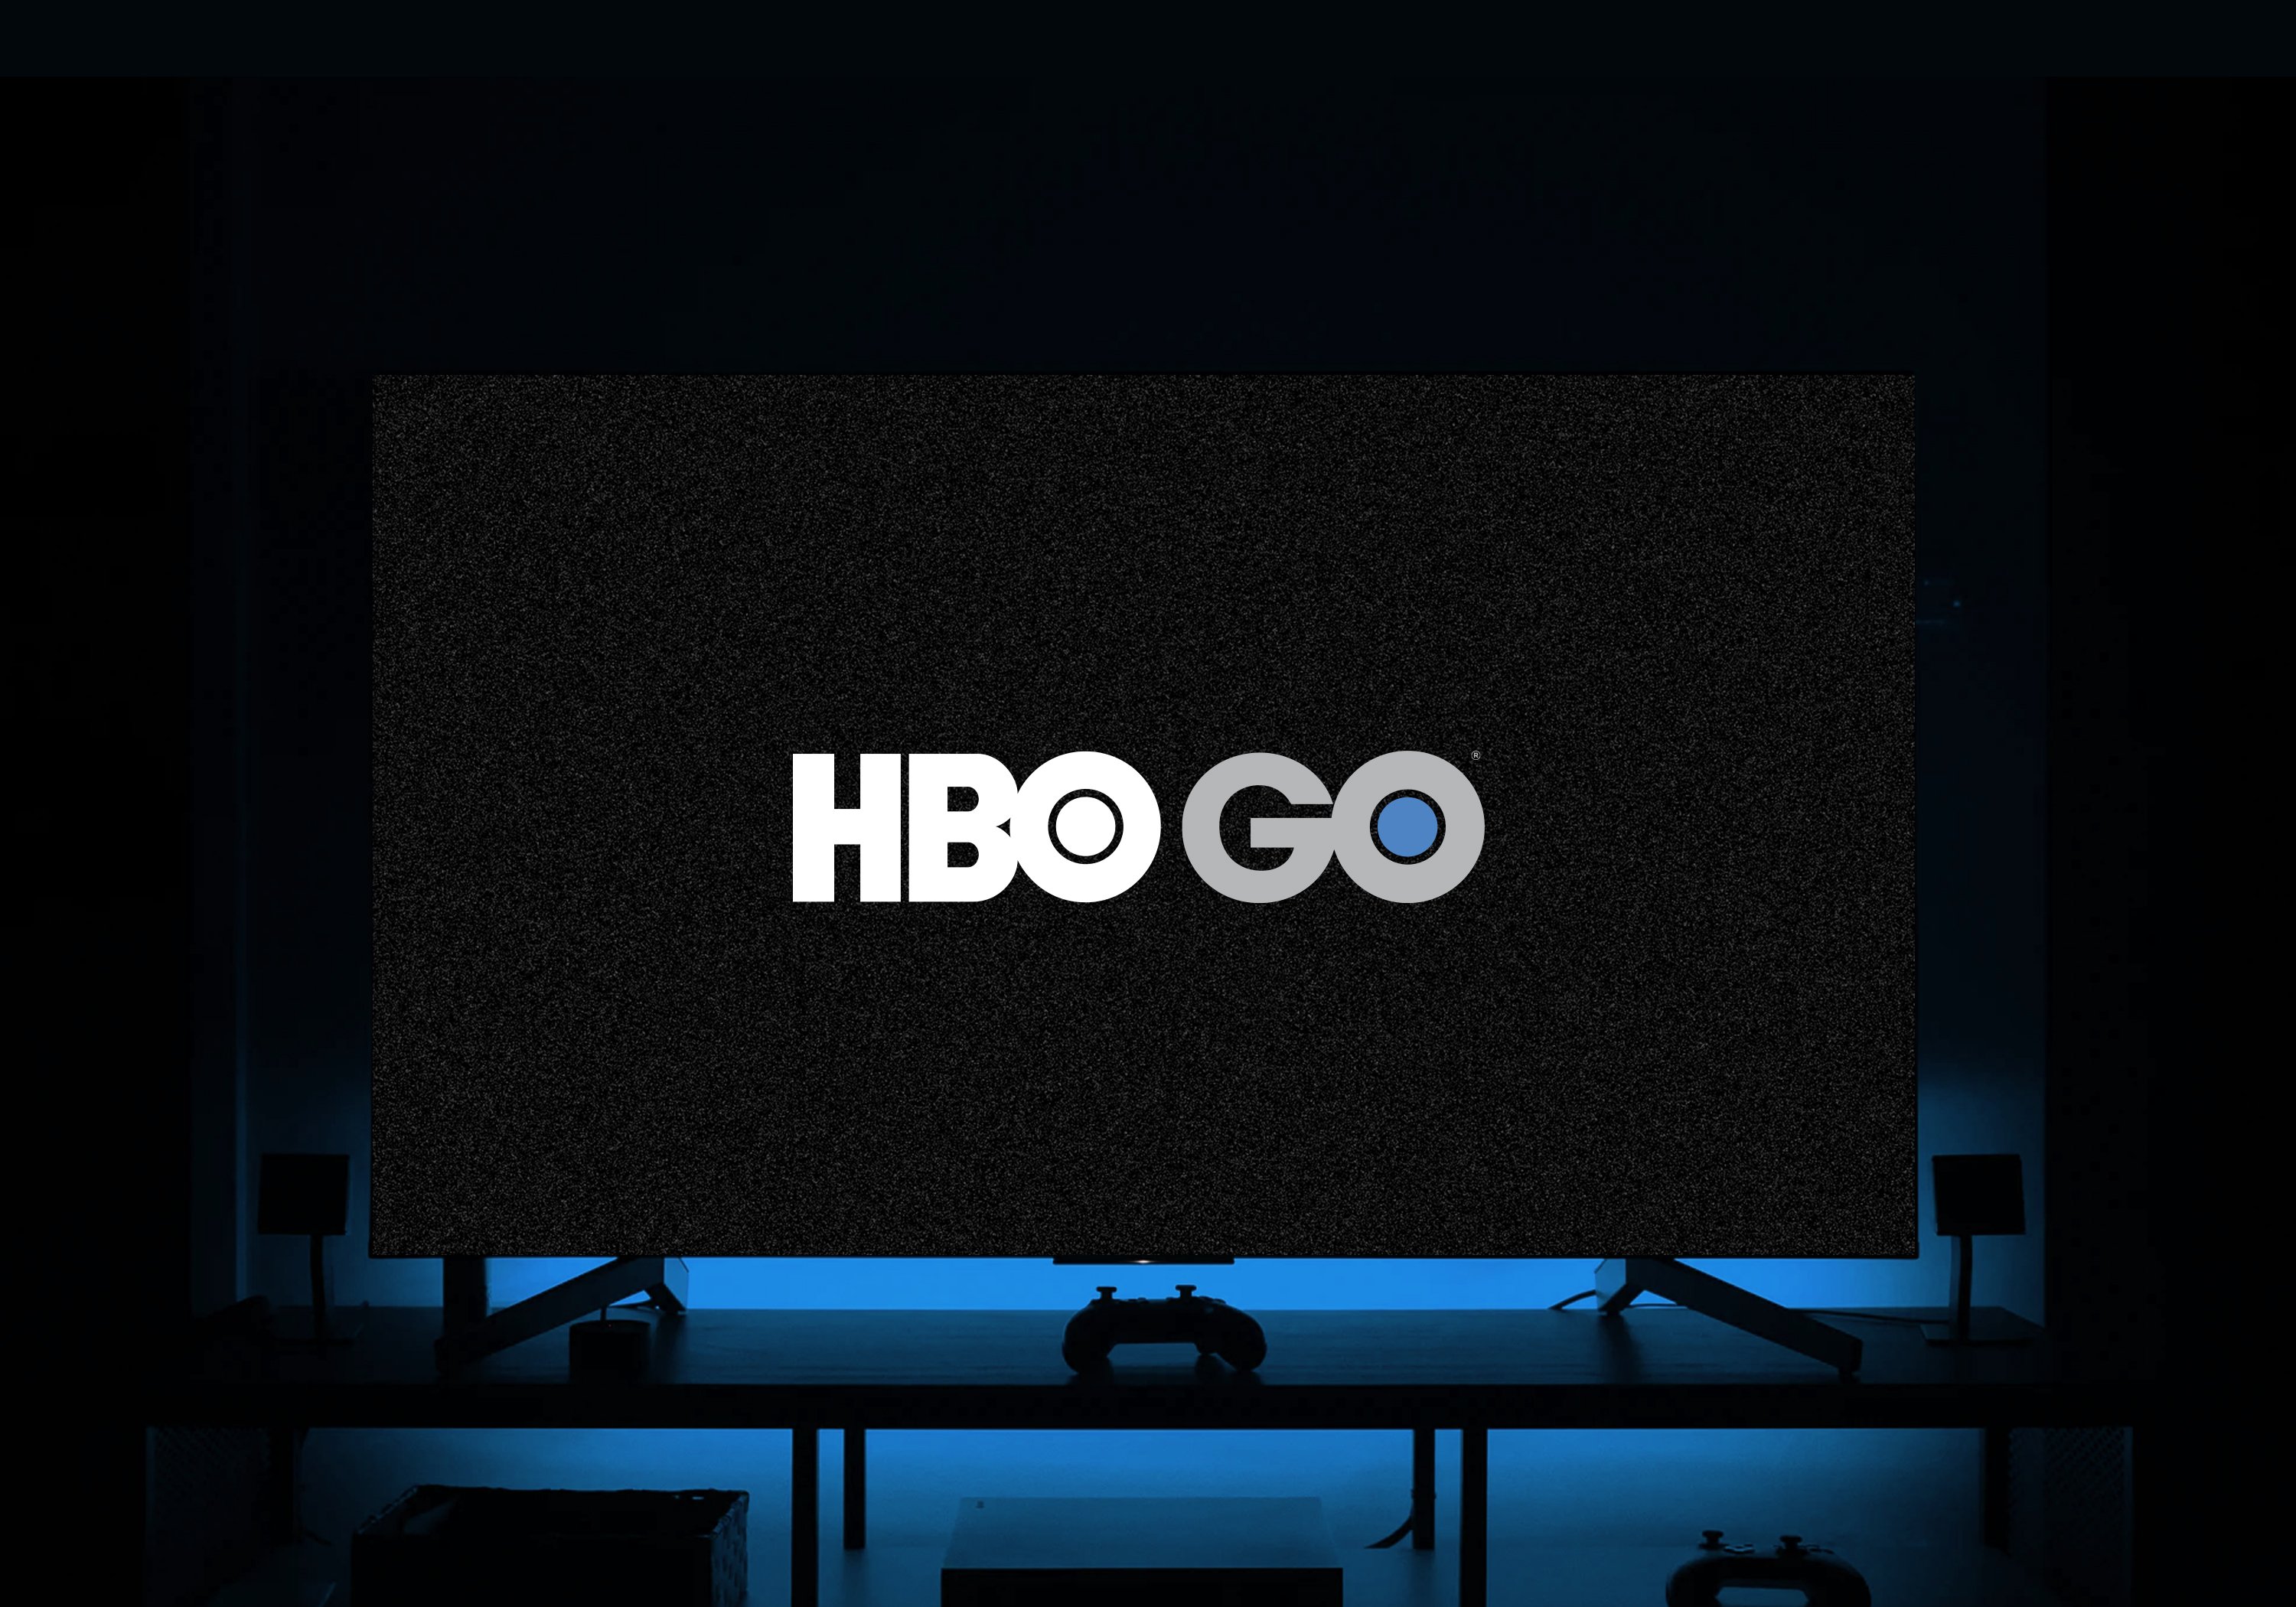 Get unlimited access to all of HBO, Hollywood blockbusters, and more right here on HBO GO. With new episodes and movies added weekly, you will never run out of shows to watch! Binge all HBO shows with new Original series released at the same time as the U.S.